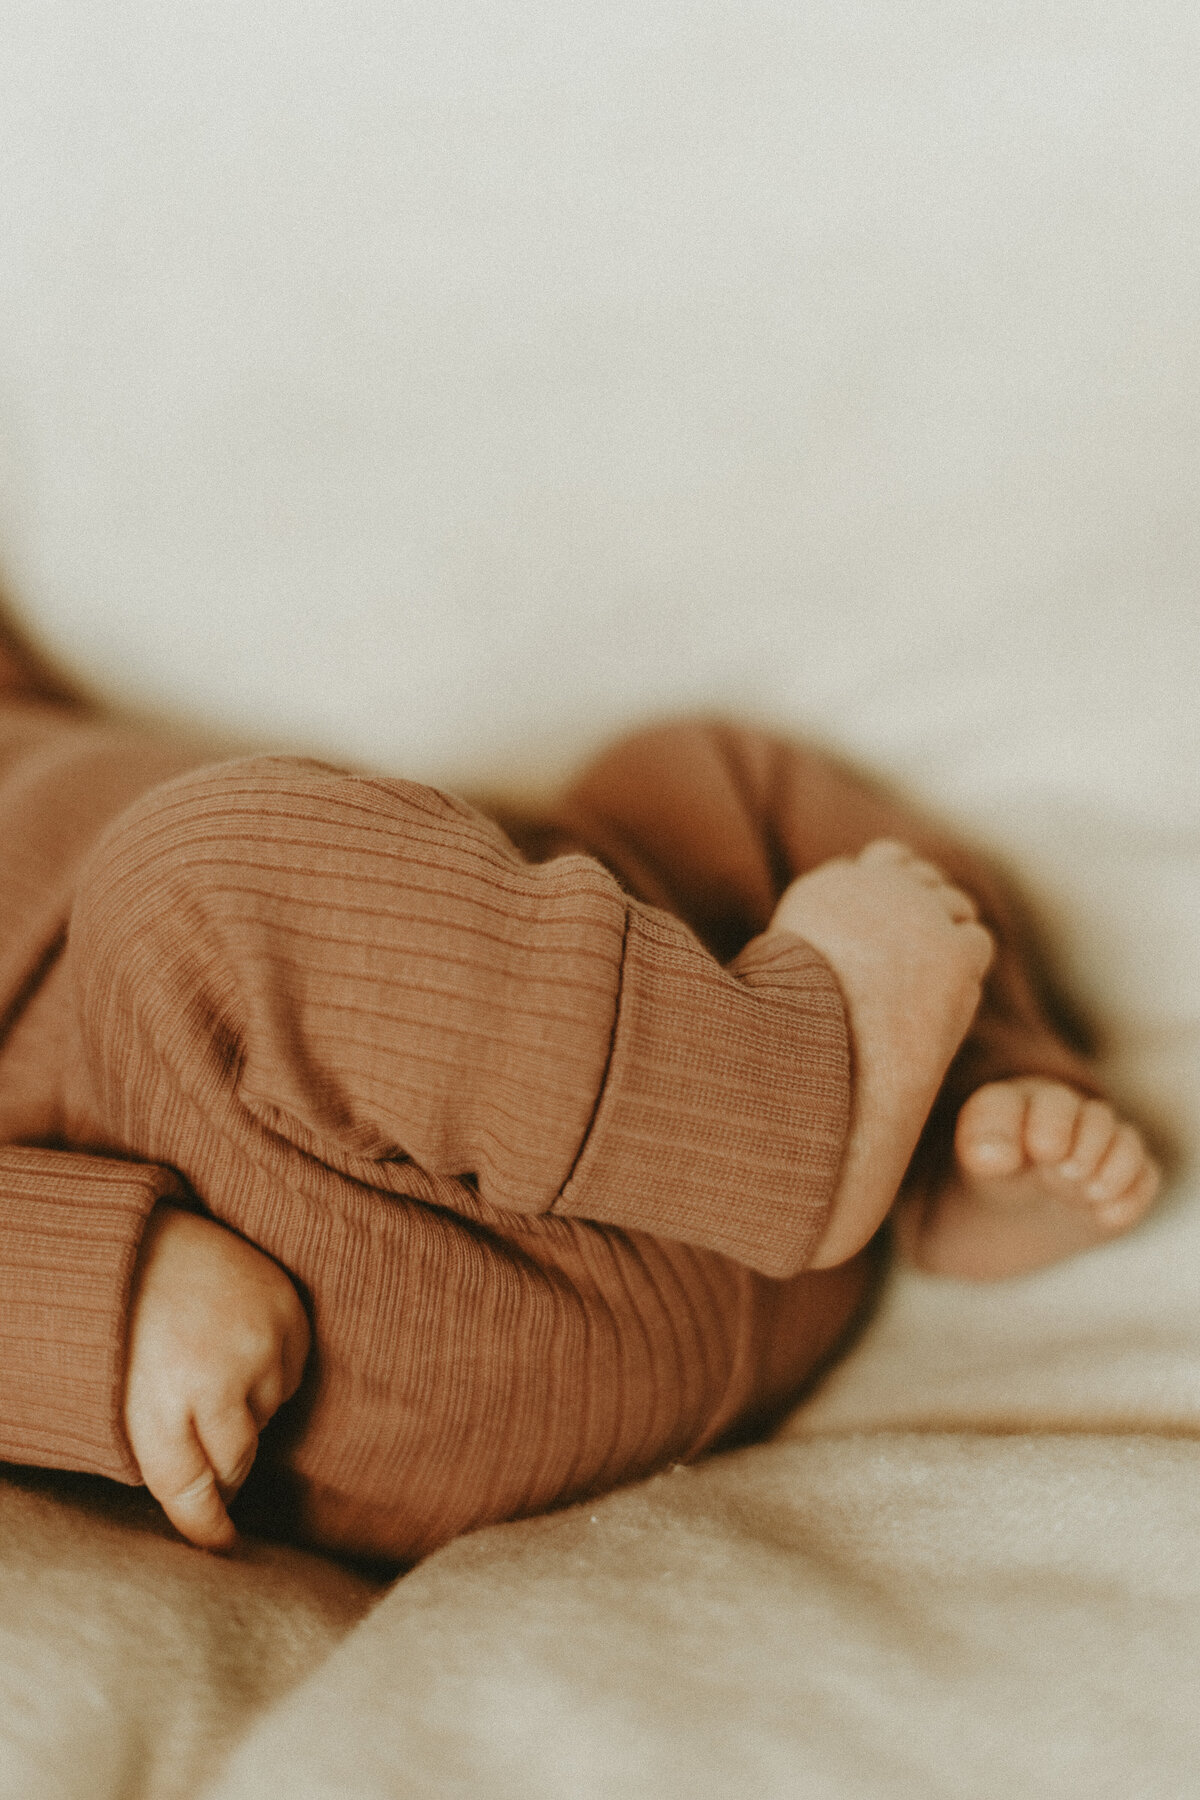 modern newborn photo of a baby's bum and toes